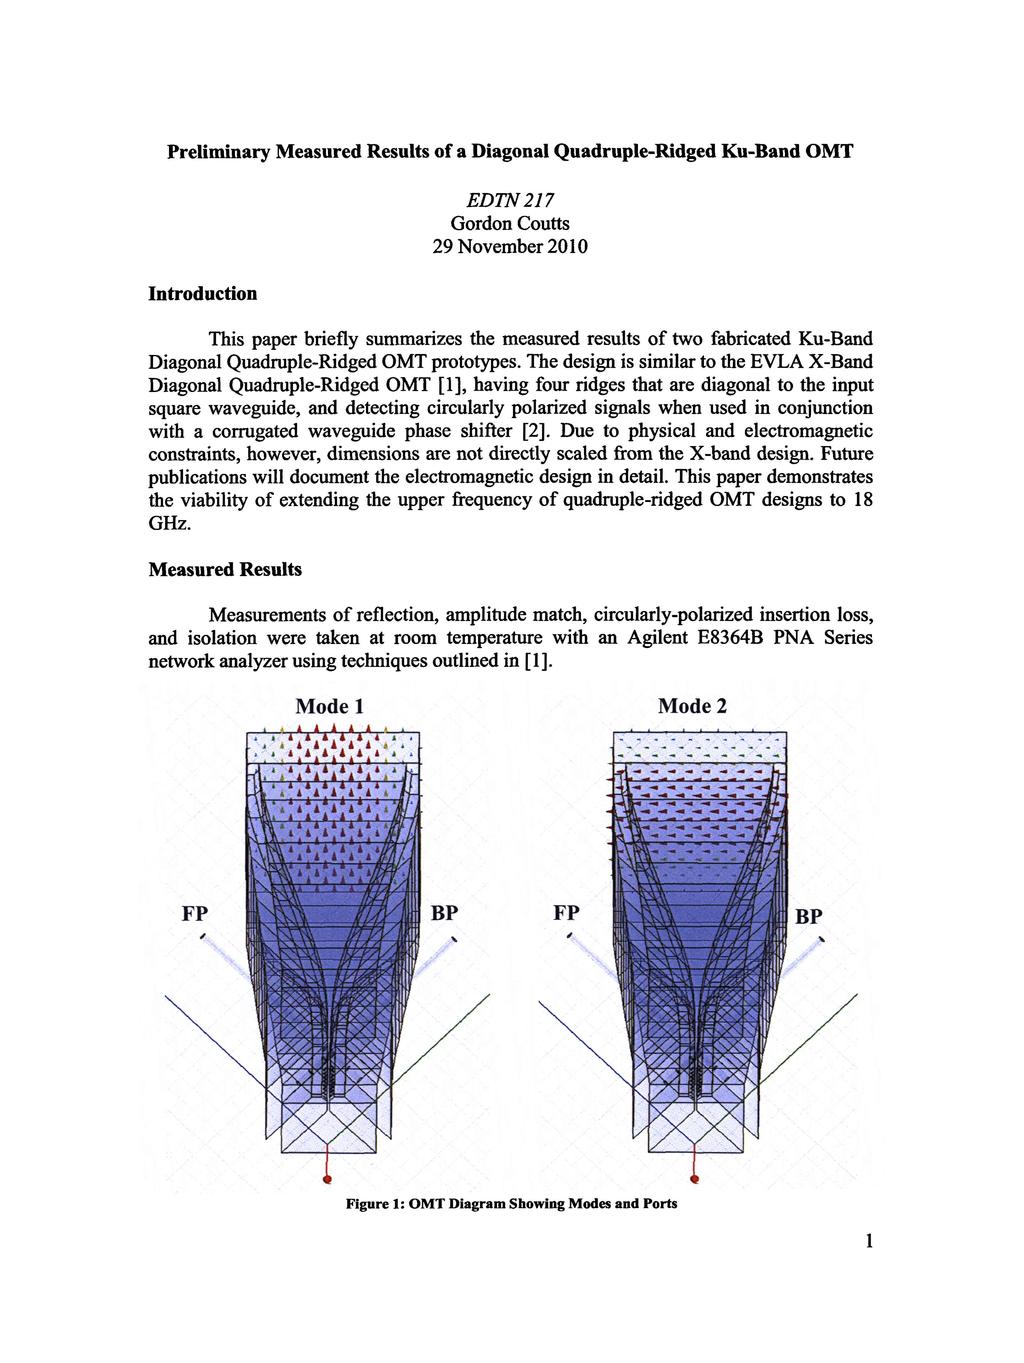 Preliminary Measured Results of a Diagonal Quadruple-Ridged Ku-Band OMT Introduction EDTN217 Gordon Courts 29 November 2010 This paper briefly summarizes the measured results of two fabricated